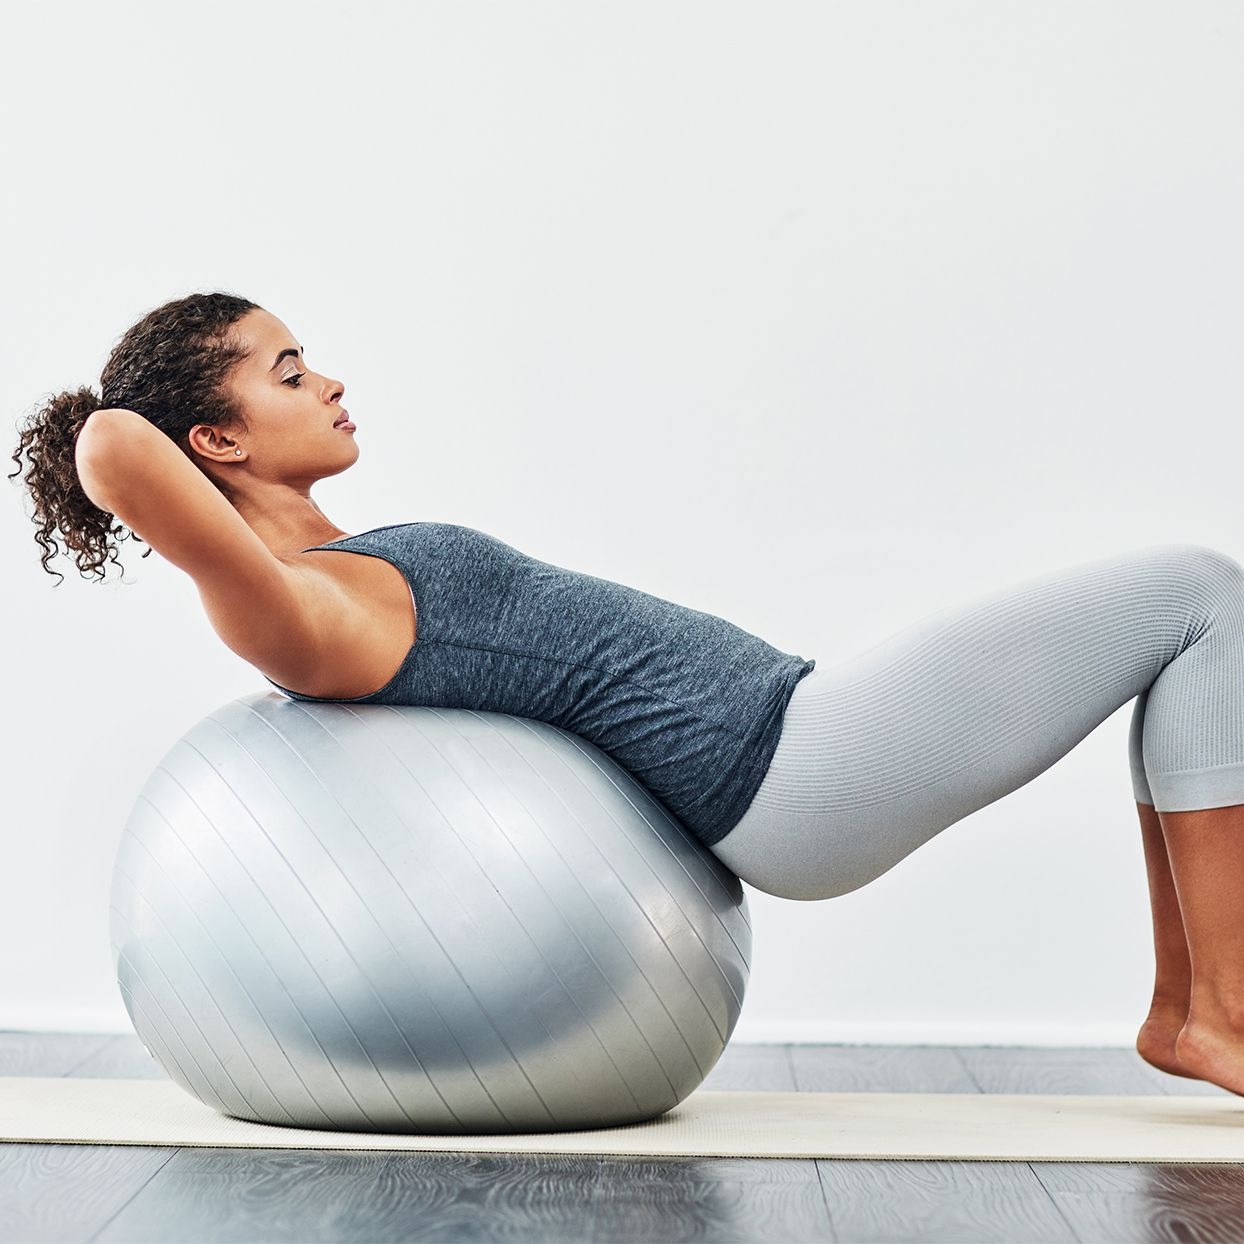 How To Use An Exercise Ball